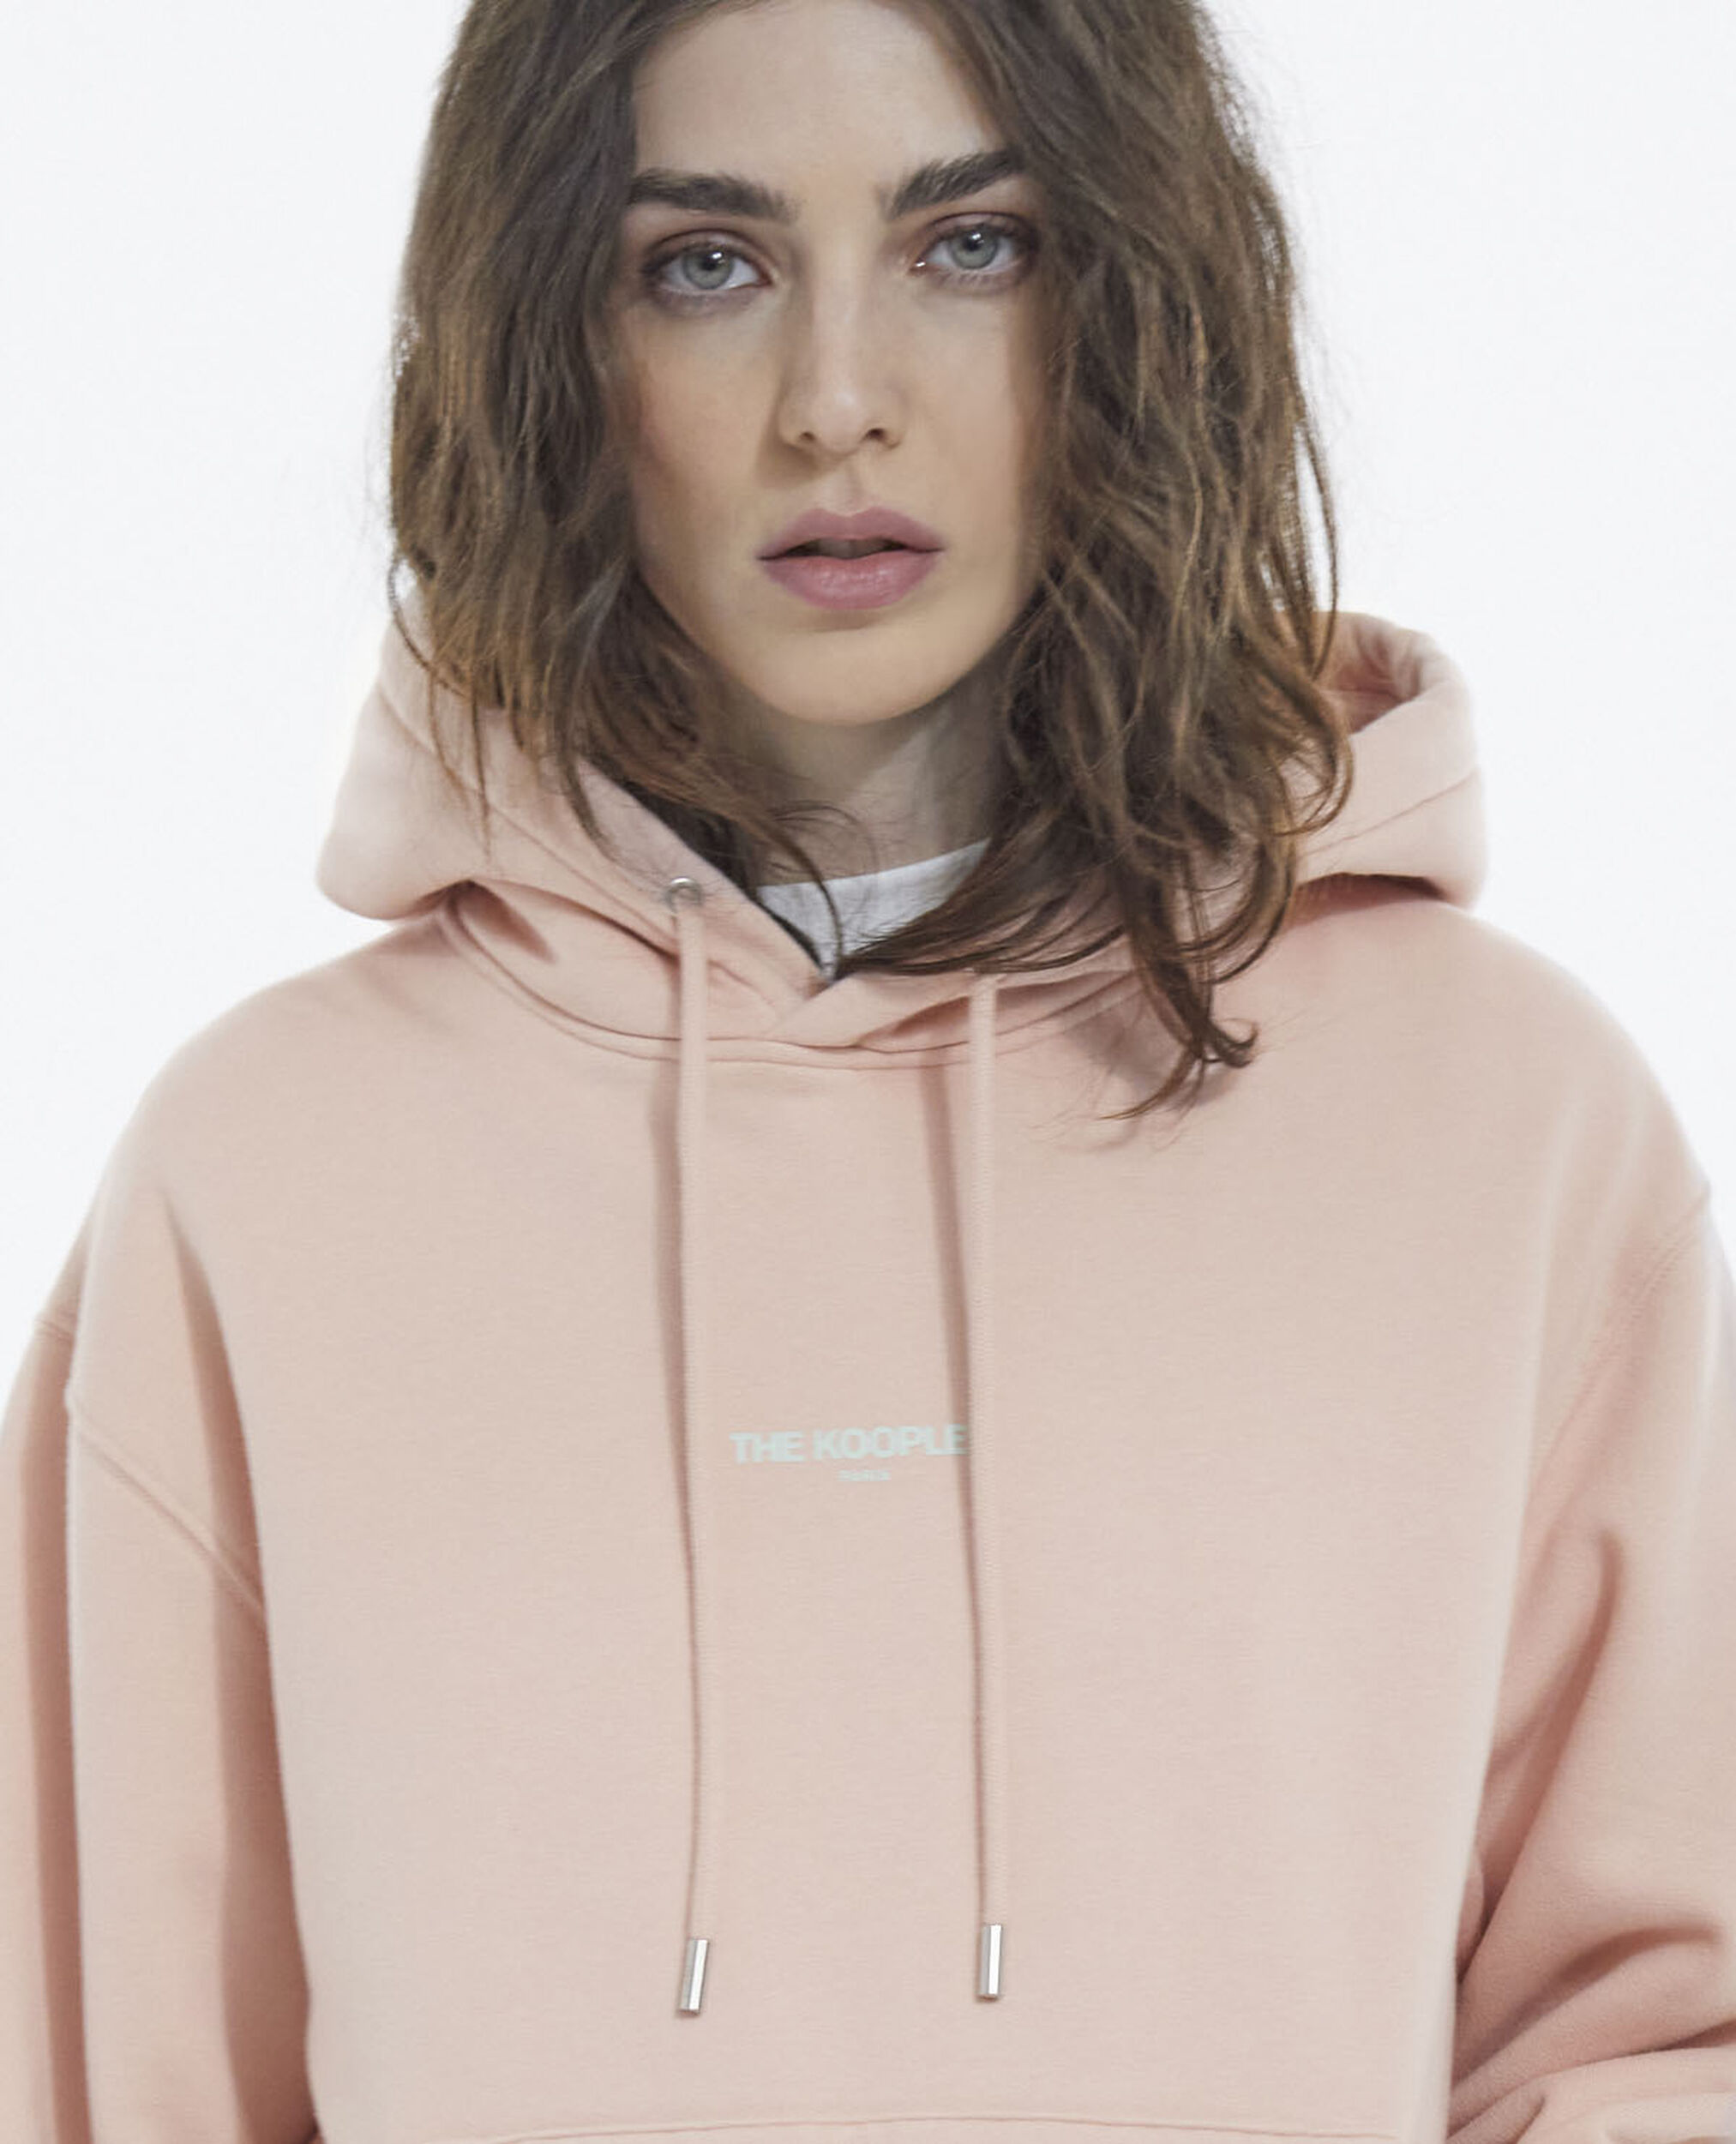 Hooded light pink sweatshirt w/ pouch pocket, PINK, hi-res image number null